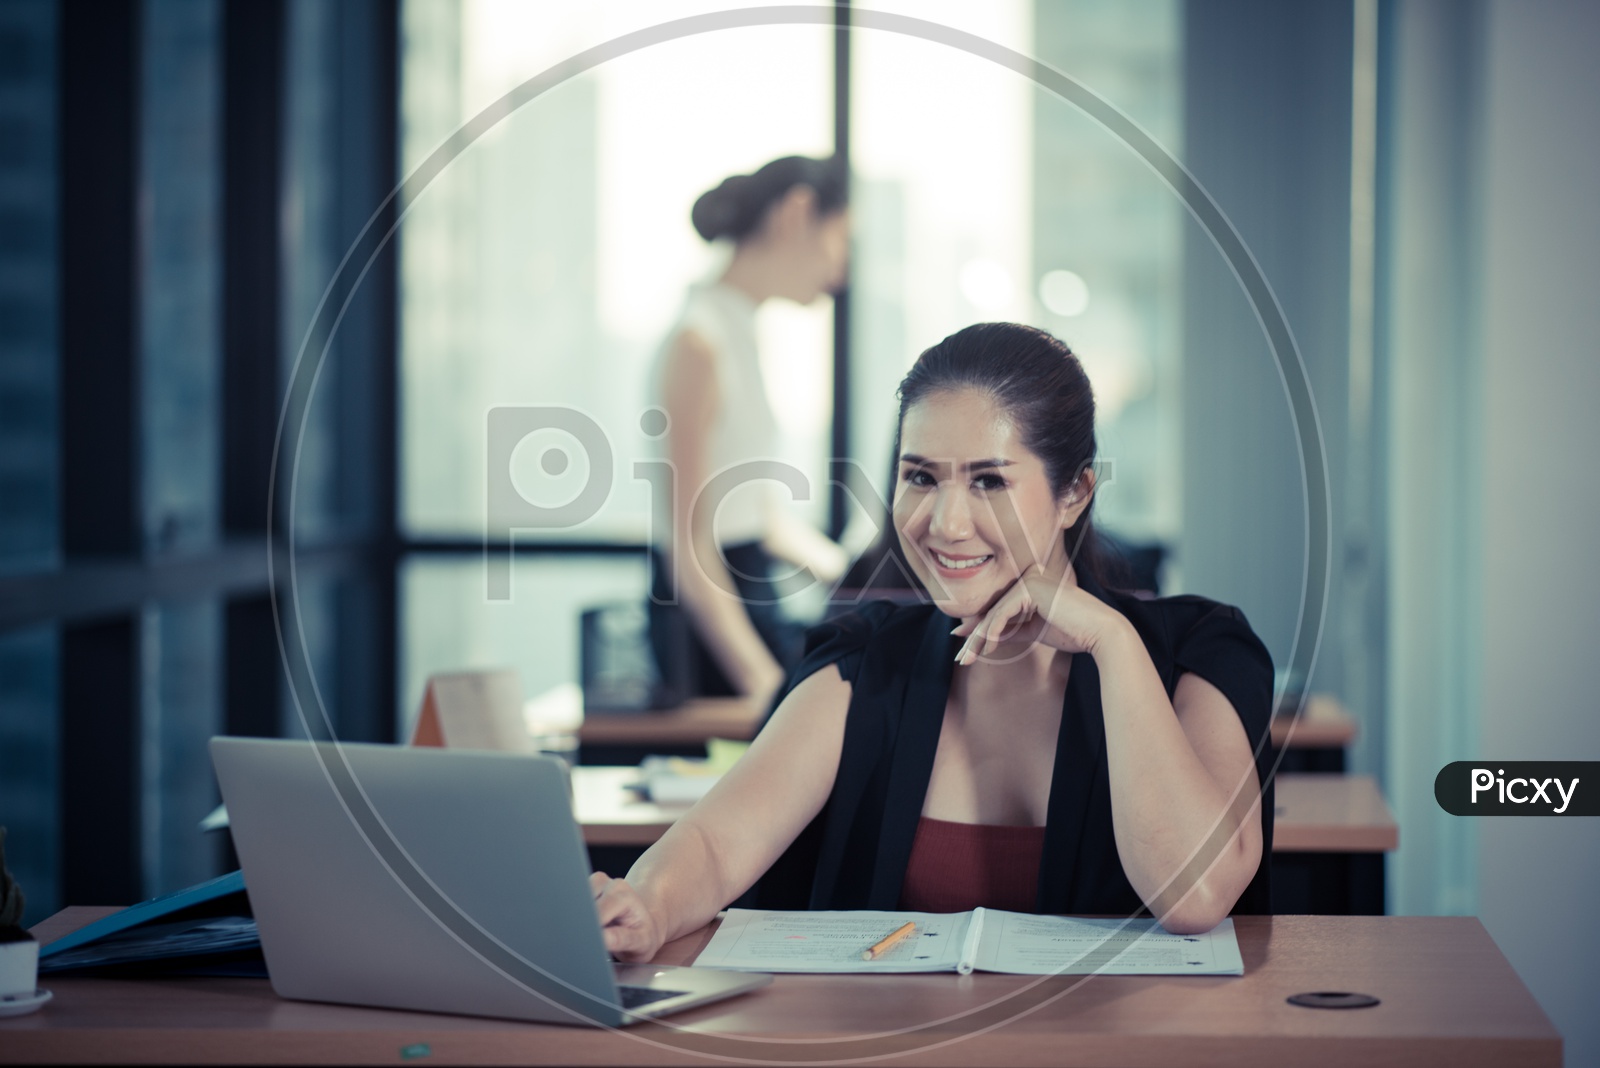 Smiling Young Asian Businesswoman working on Laptops at Workplace